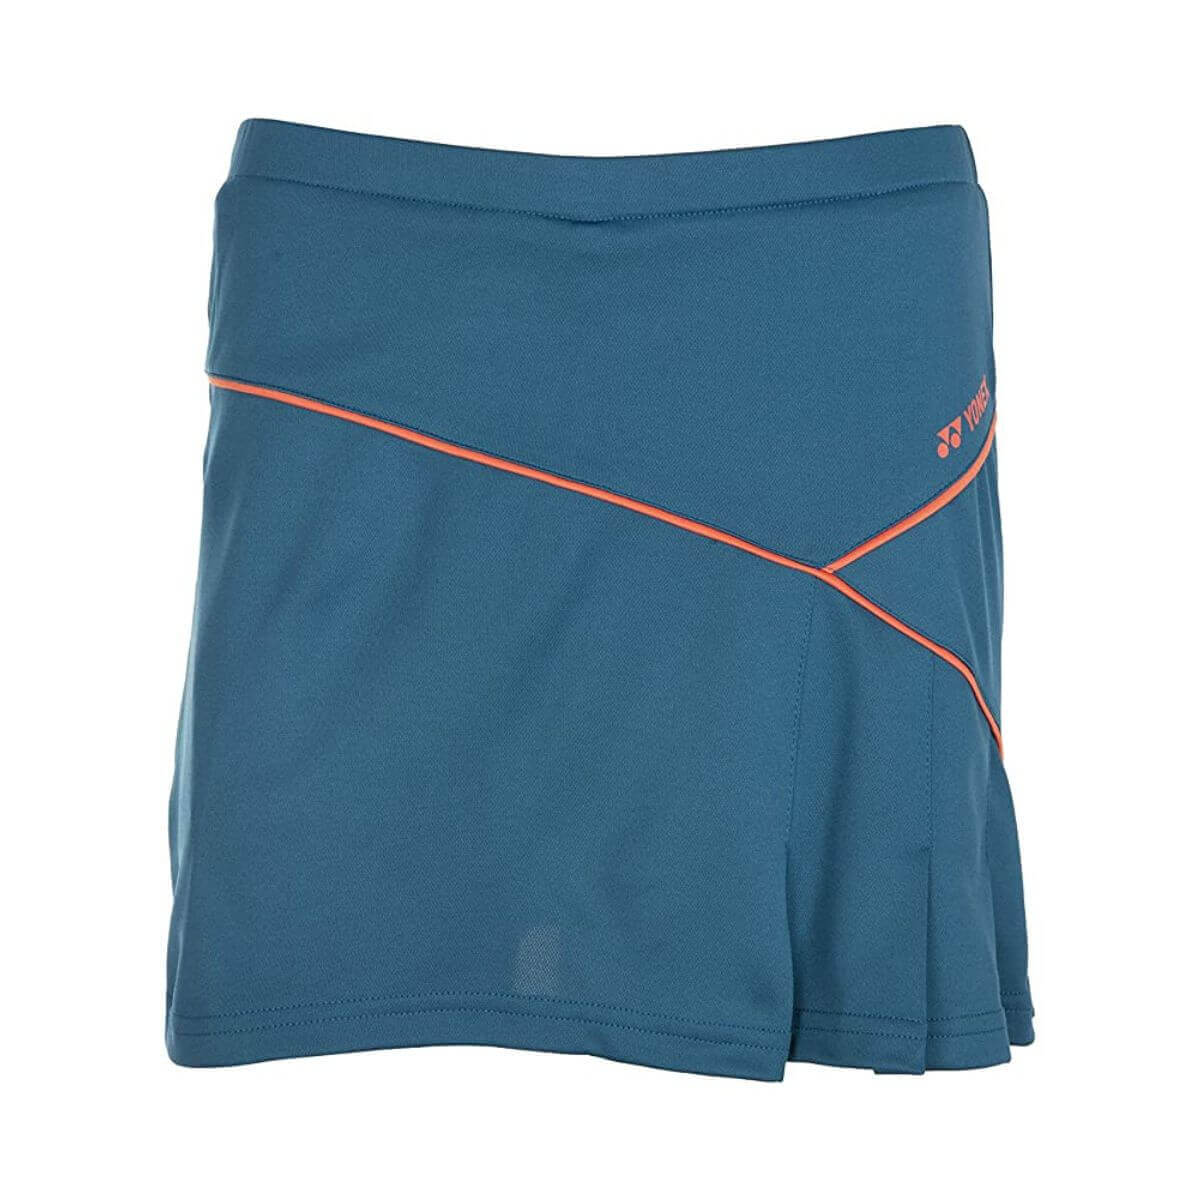 Discover more than 70 yonex skirts online best